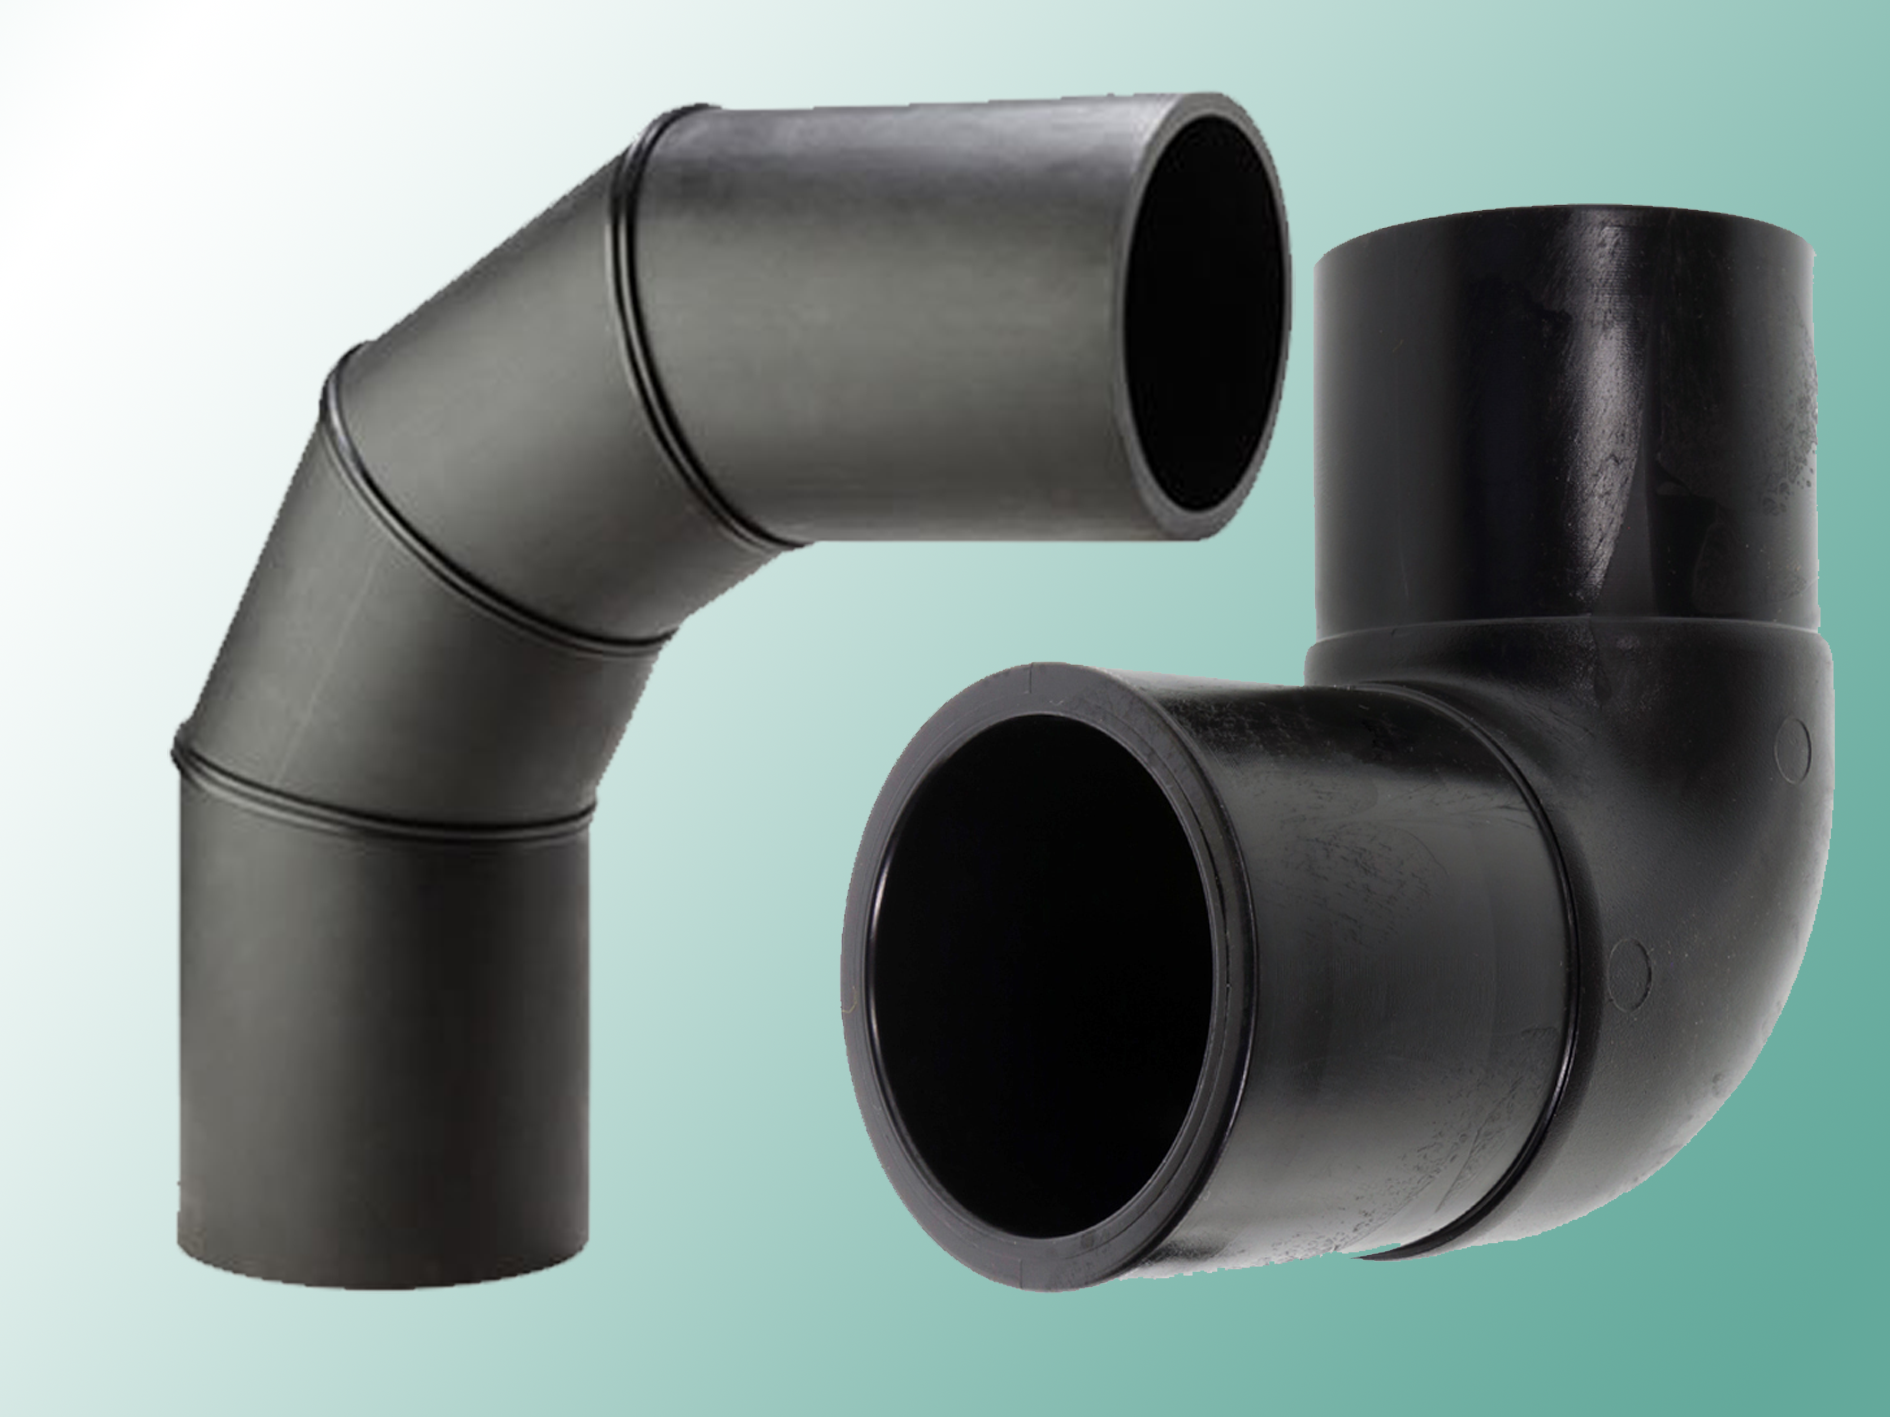 hdpe molded elbow price Archives - TheProjectEstimate.com